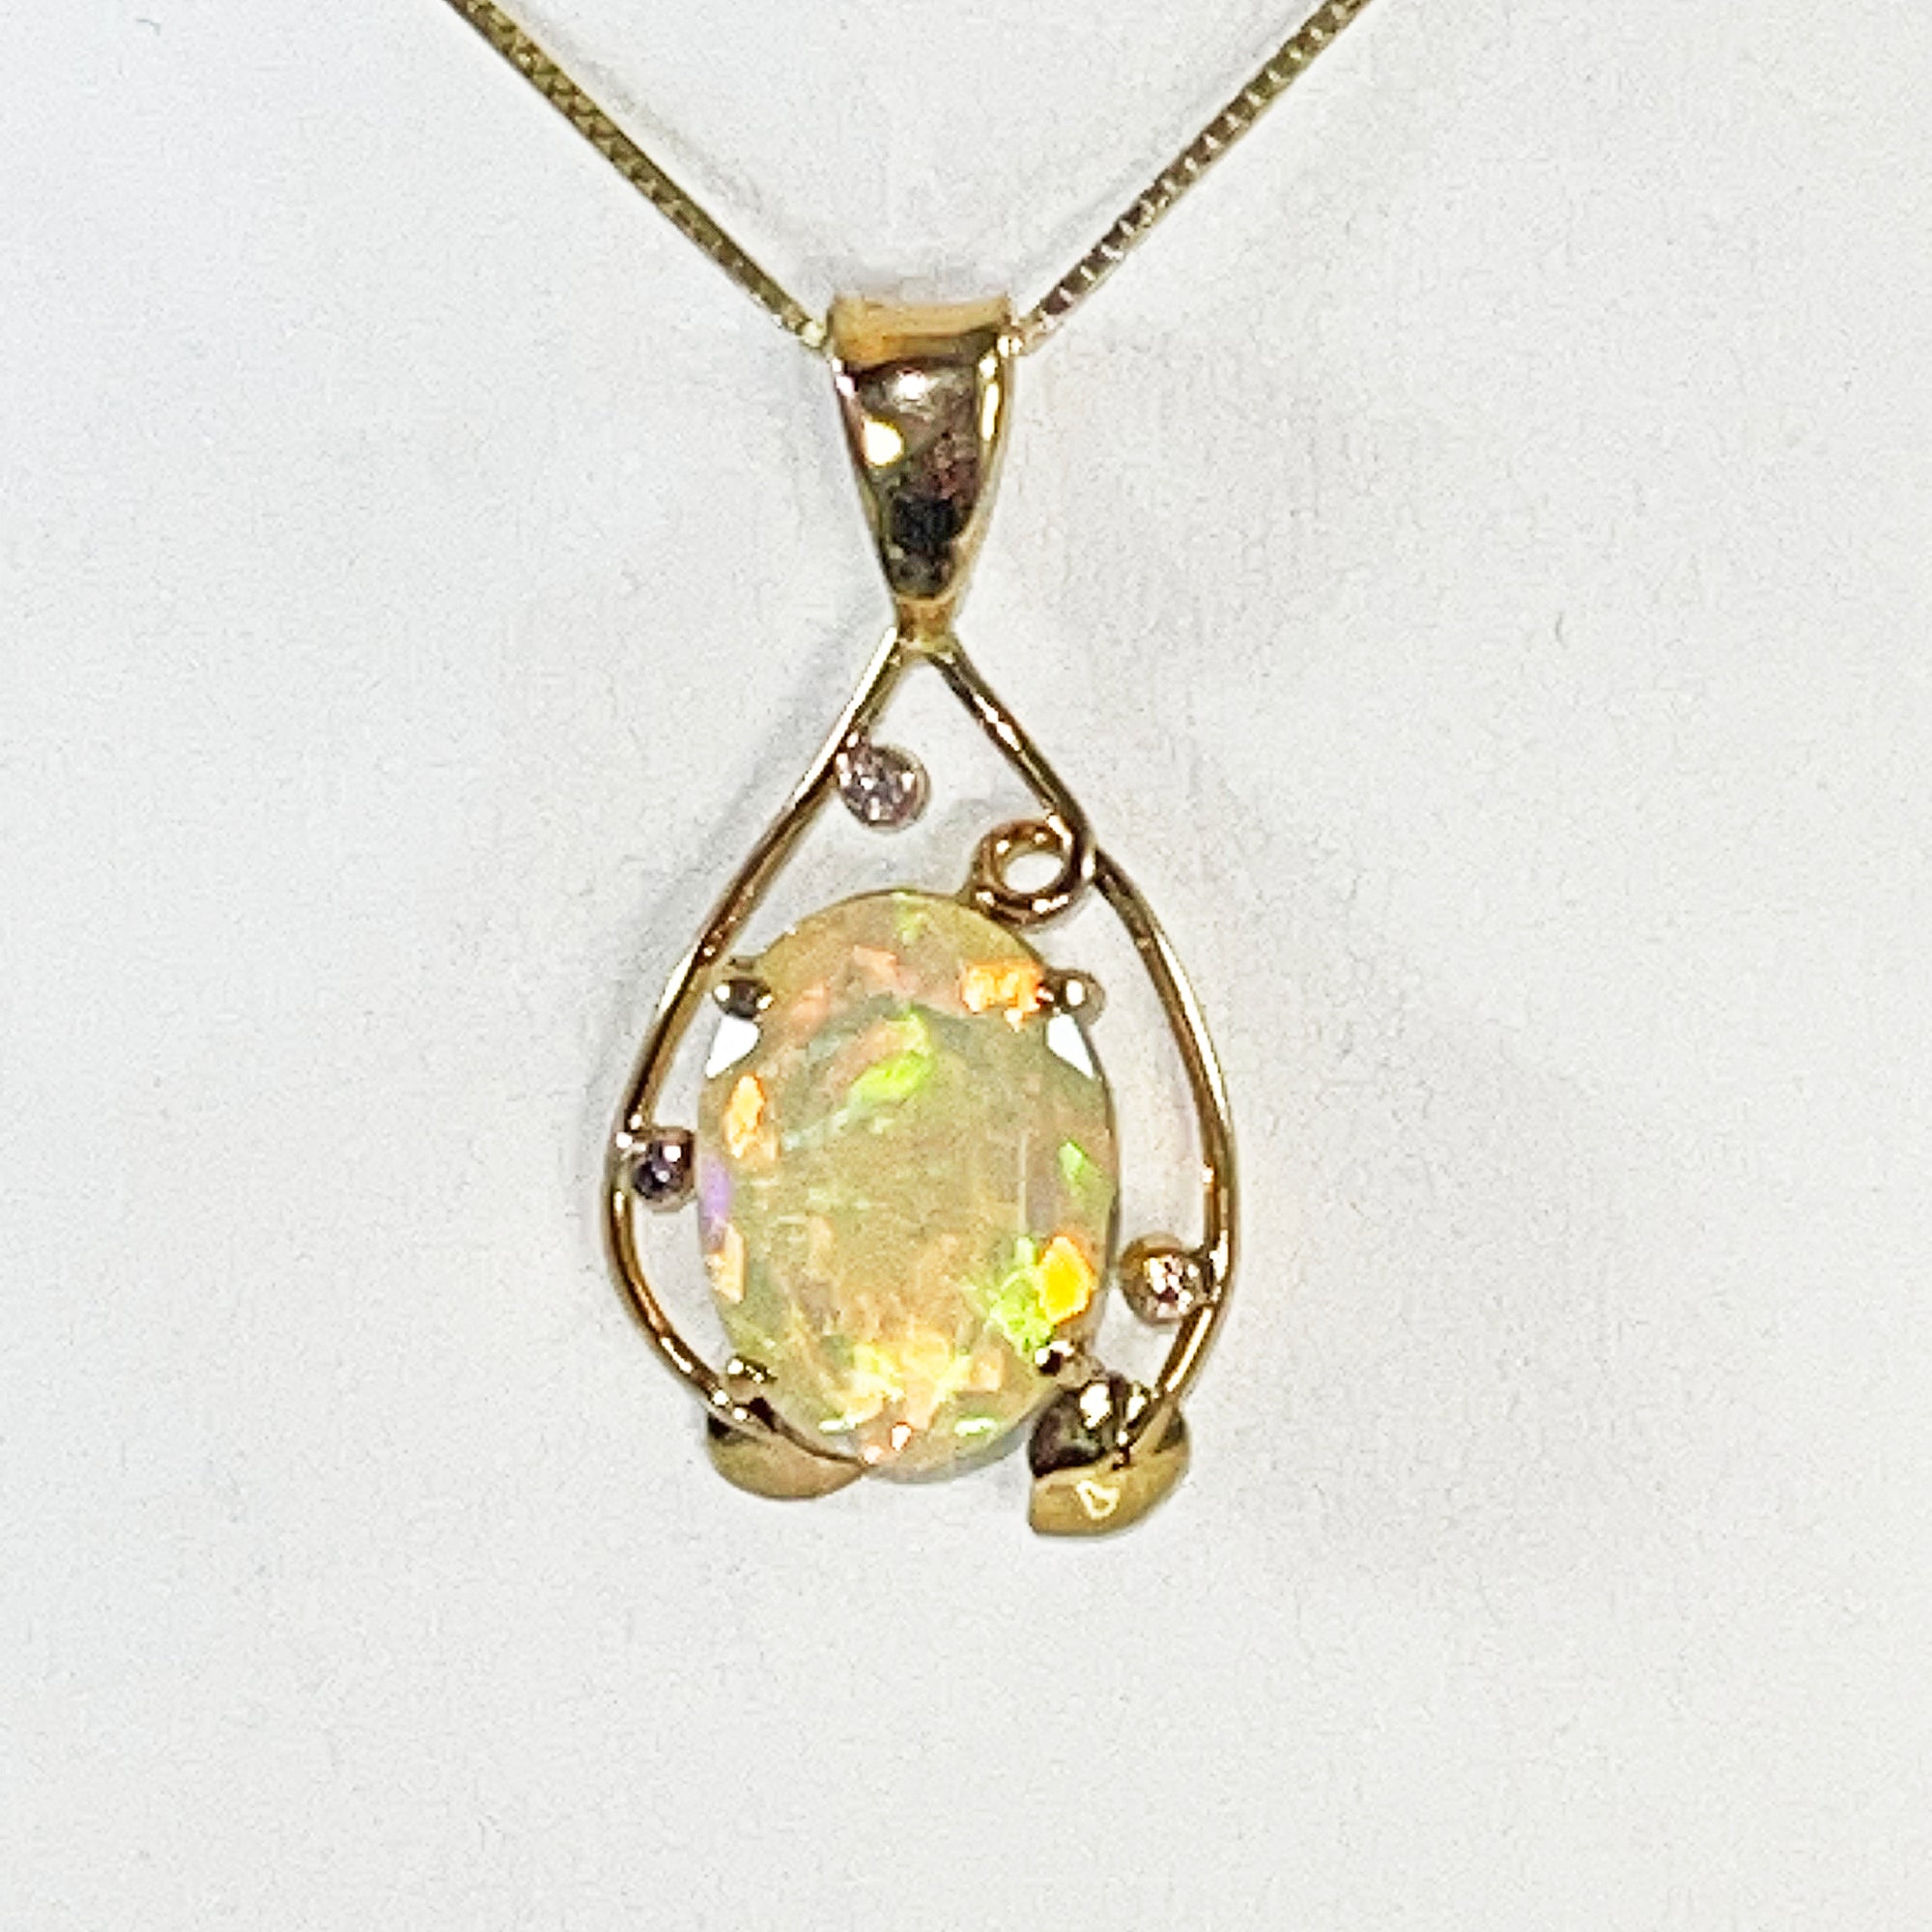 Cole Sheckler Necklace - Ethiopian Opal w/ Diamonds in 14kt Yellow Gold Scrolls and Leaves